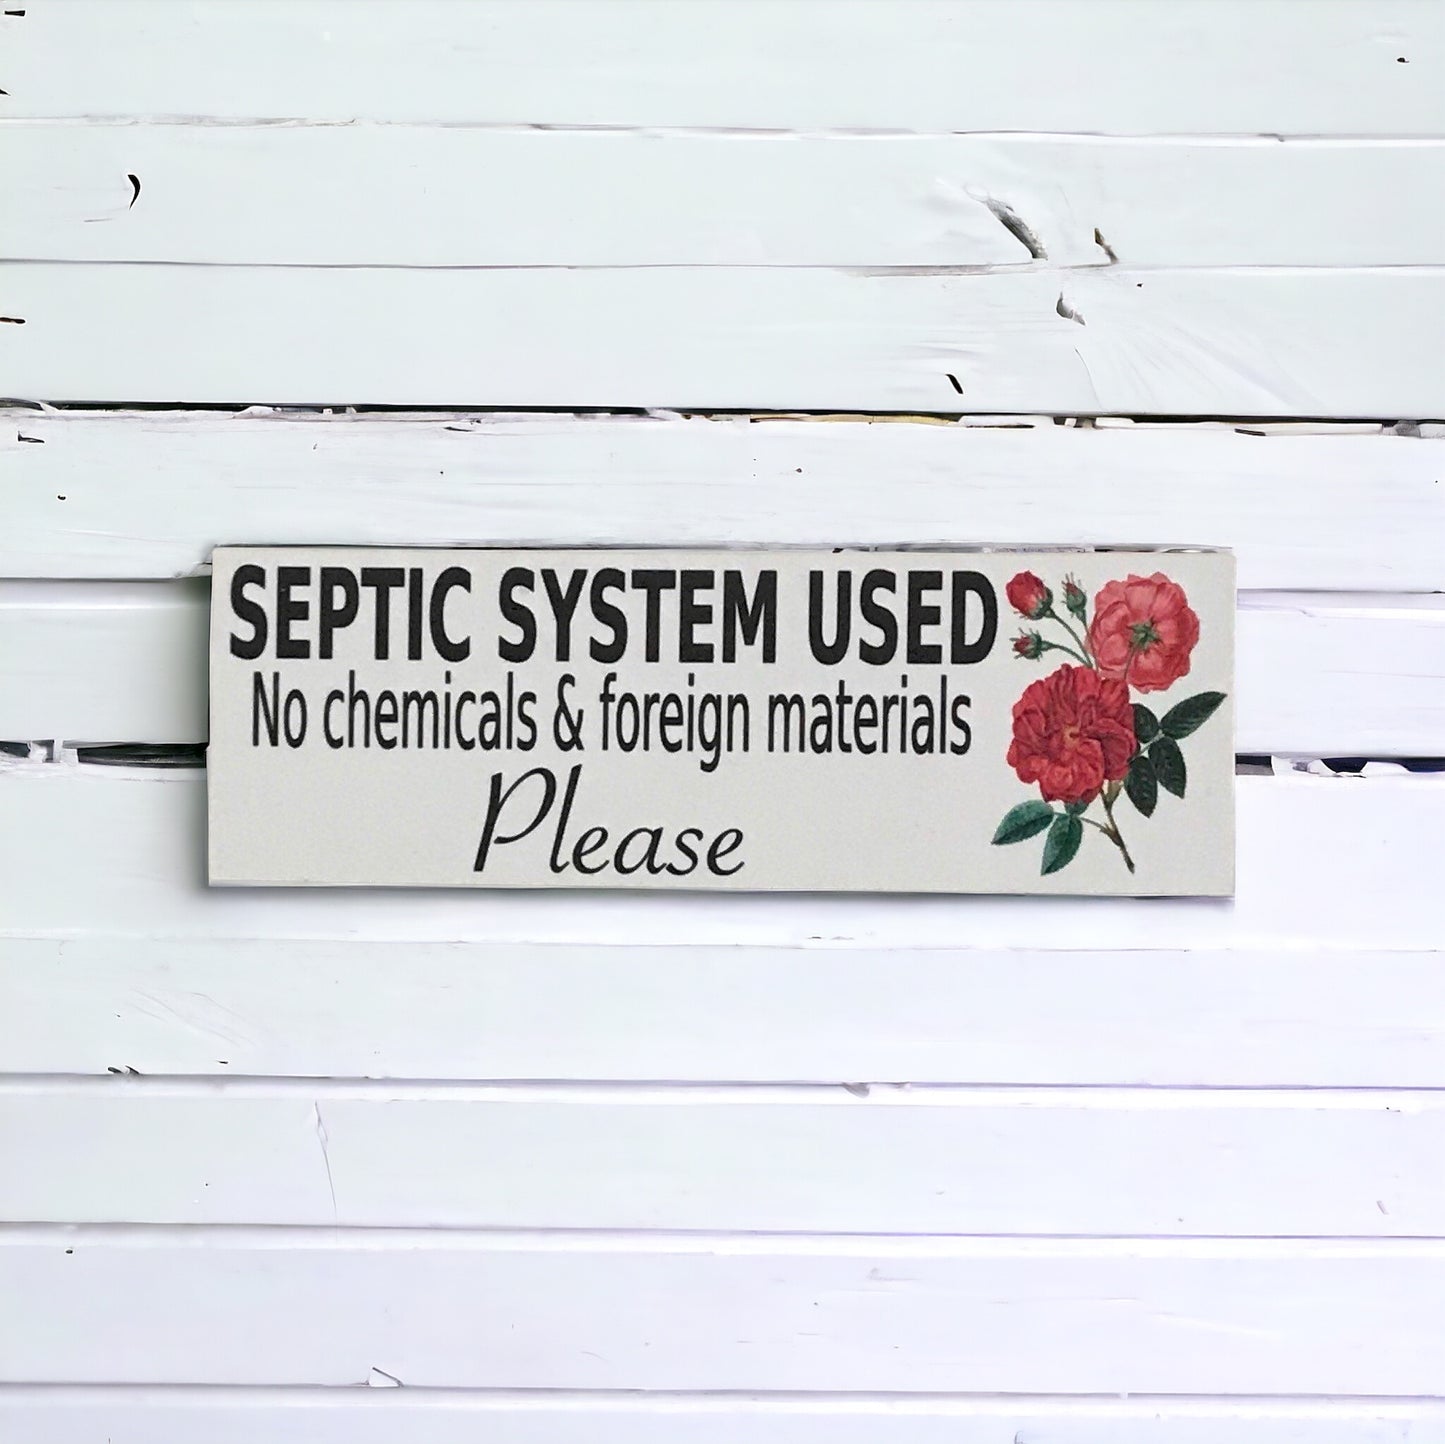 Toilet Bathroom Flush Eco Red Rose Bud Sign - The Renmy Store Homewares & Gifts 